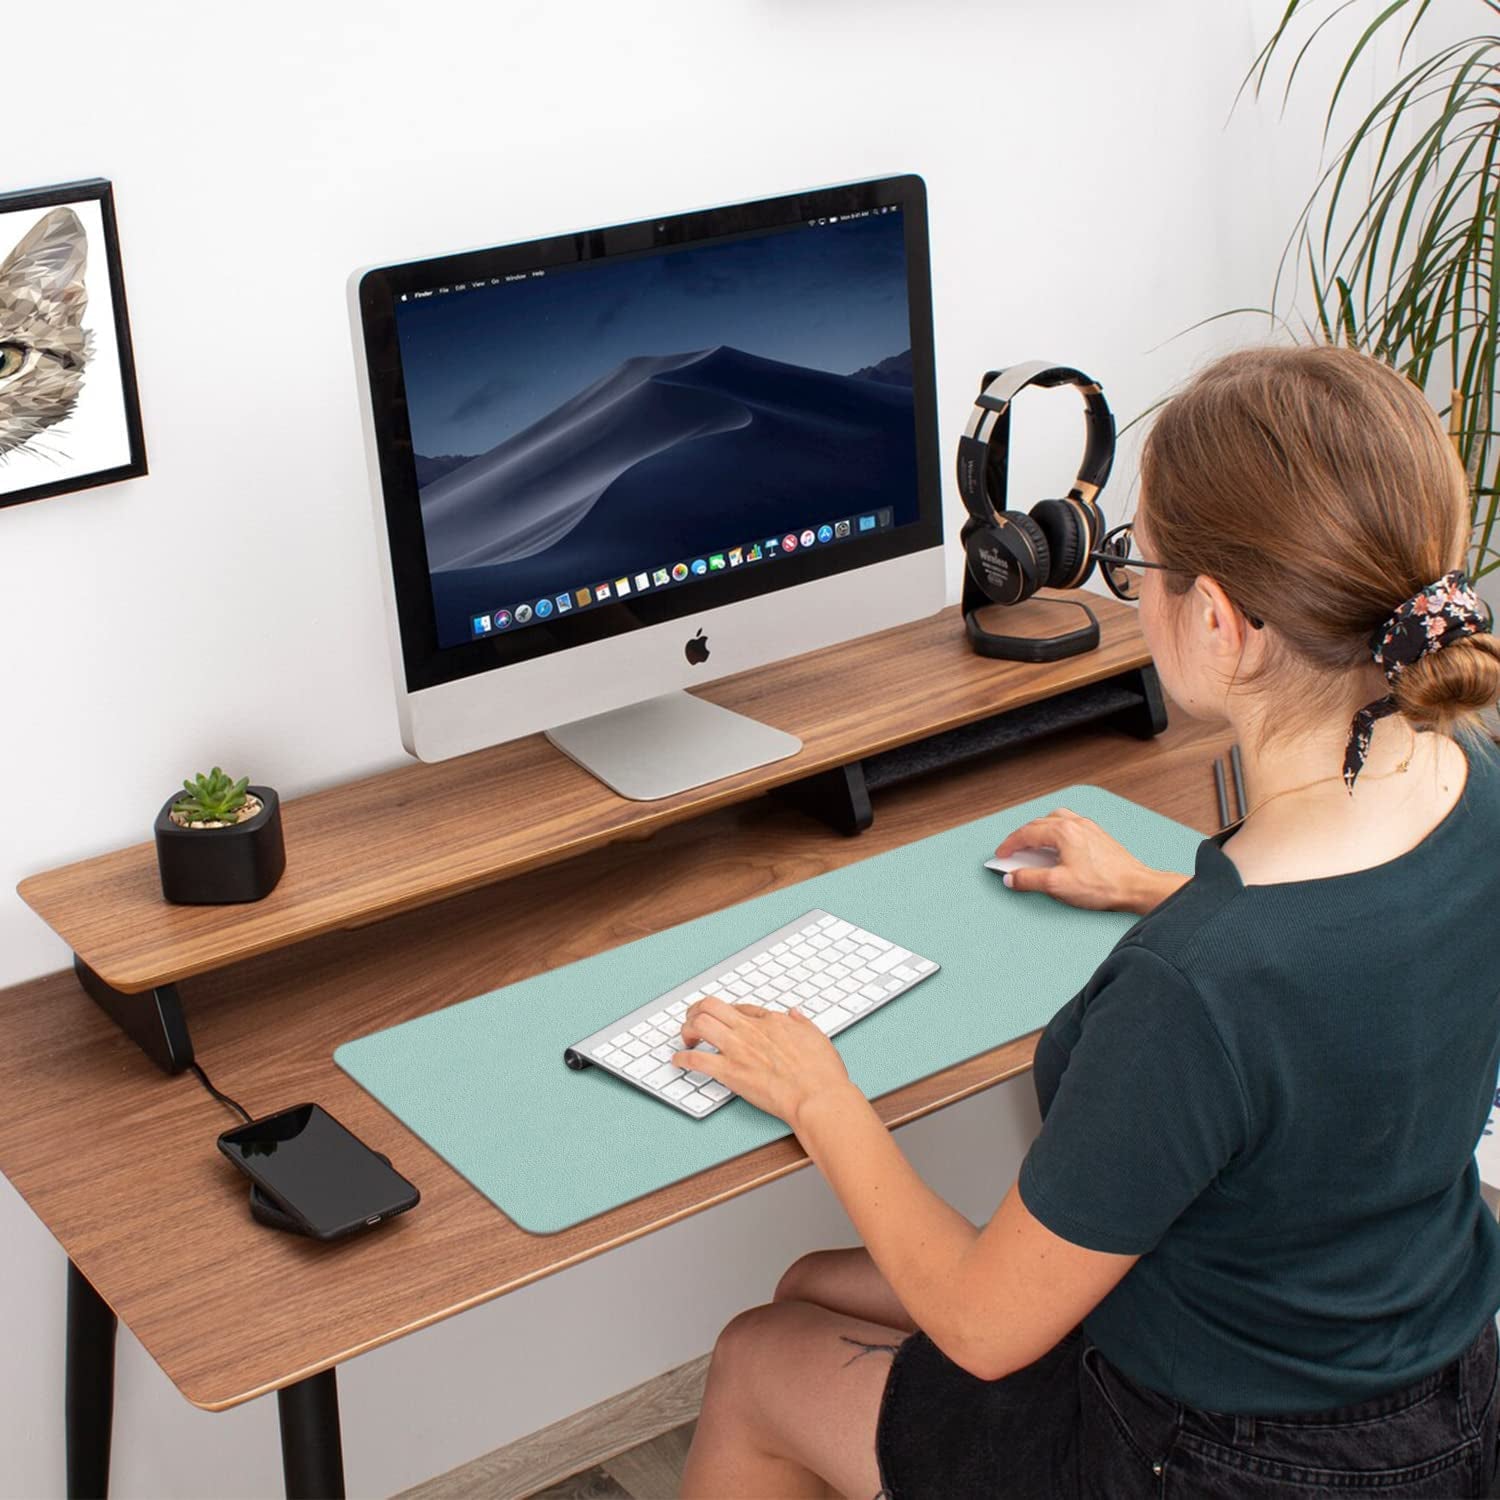 Desk Mat Large Protector Pad - Multifunctional Dual-Sided Office Desk Pad,Smooth Surface Soft Mouse Pad,Waterproof Desk Mat for Desktop, Pu Leather Desk Cover for Office/Home(Lake Blue, 31.5" X 15.7")